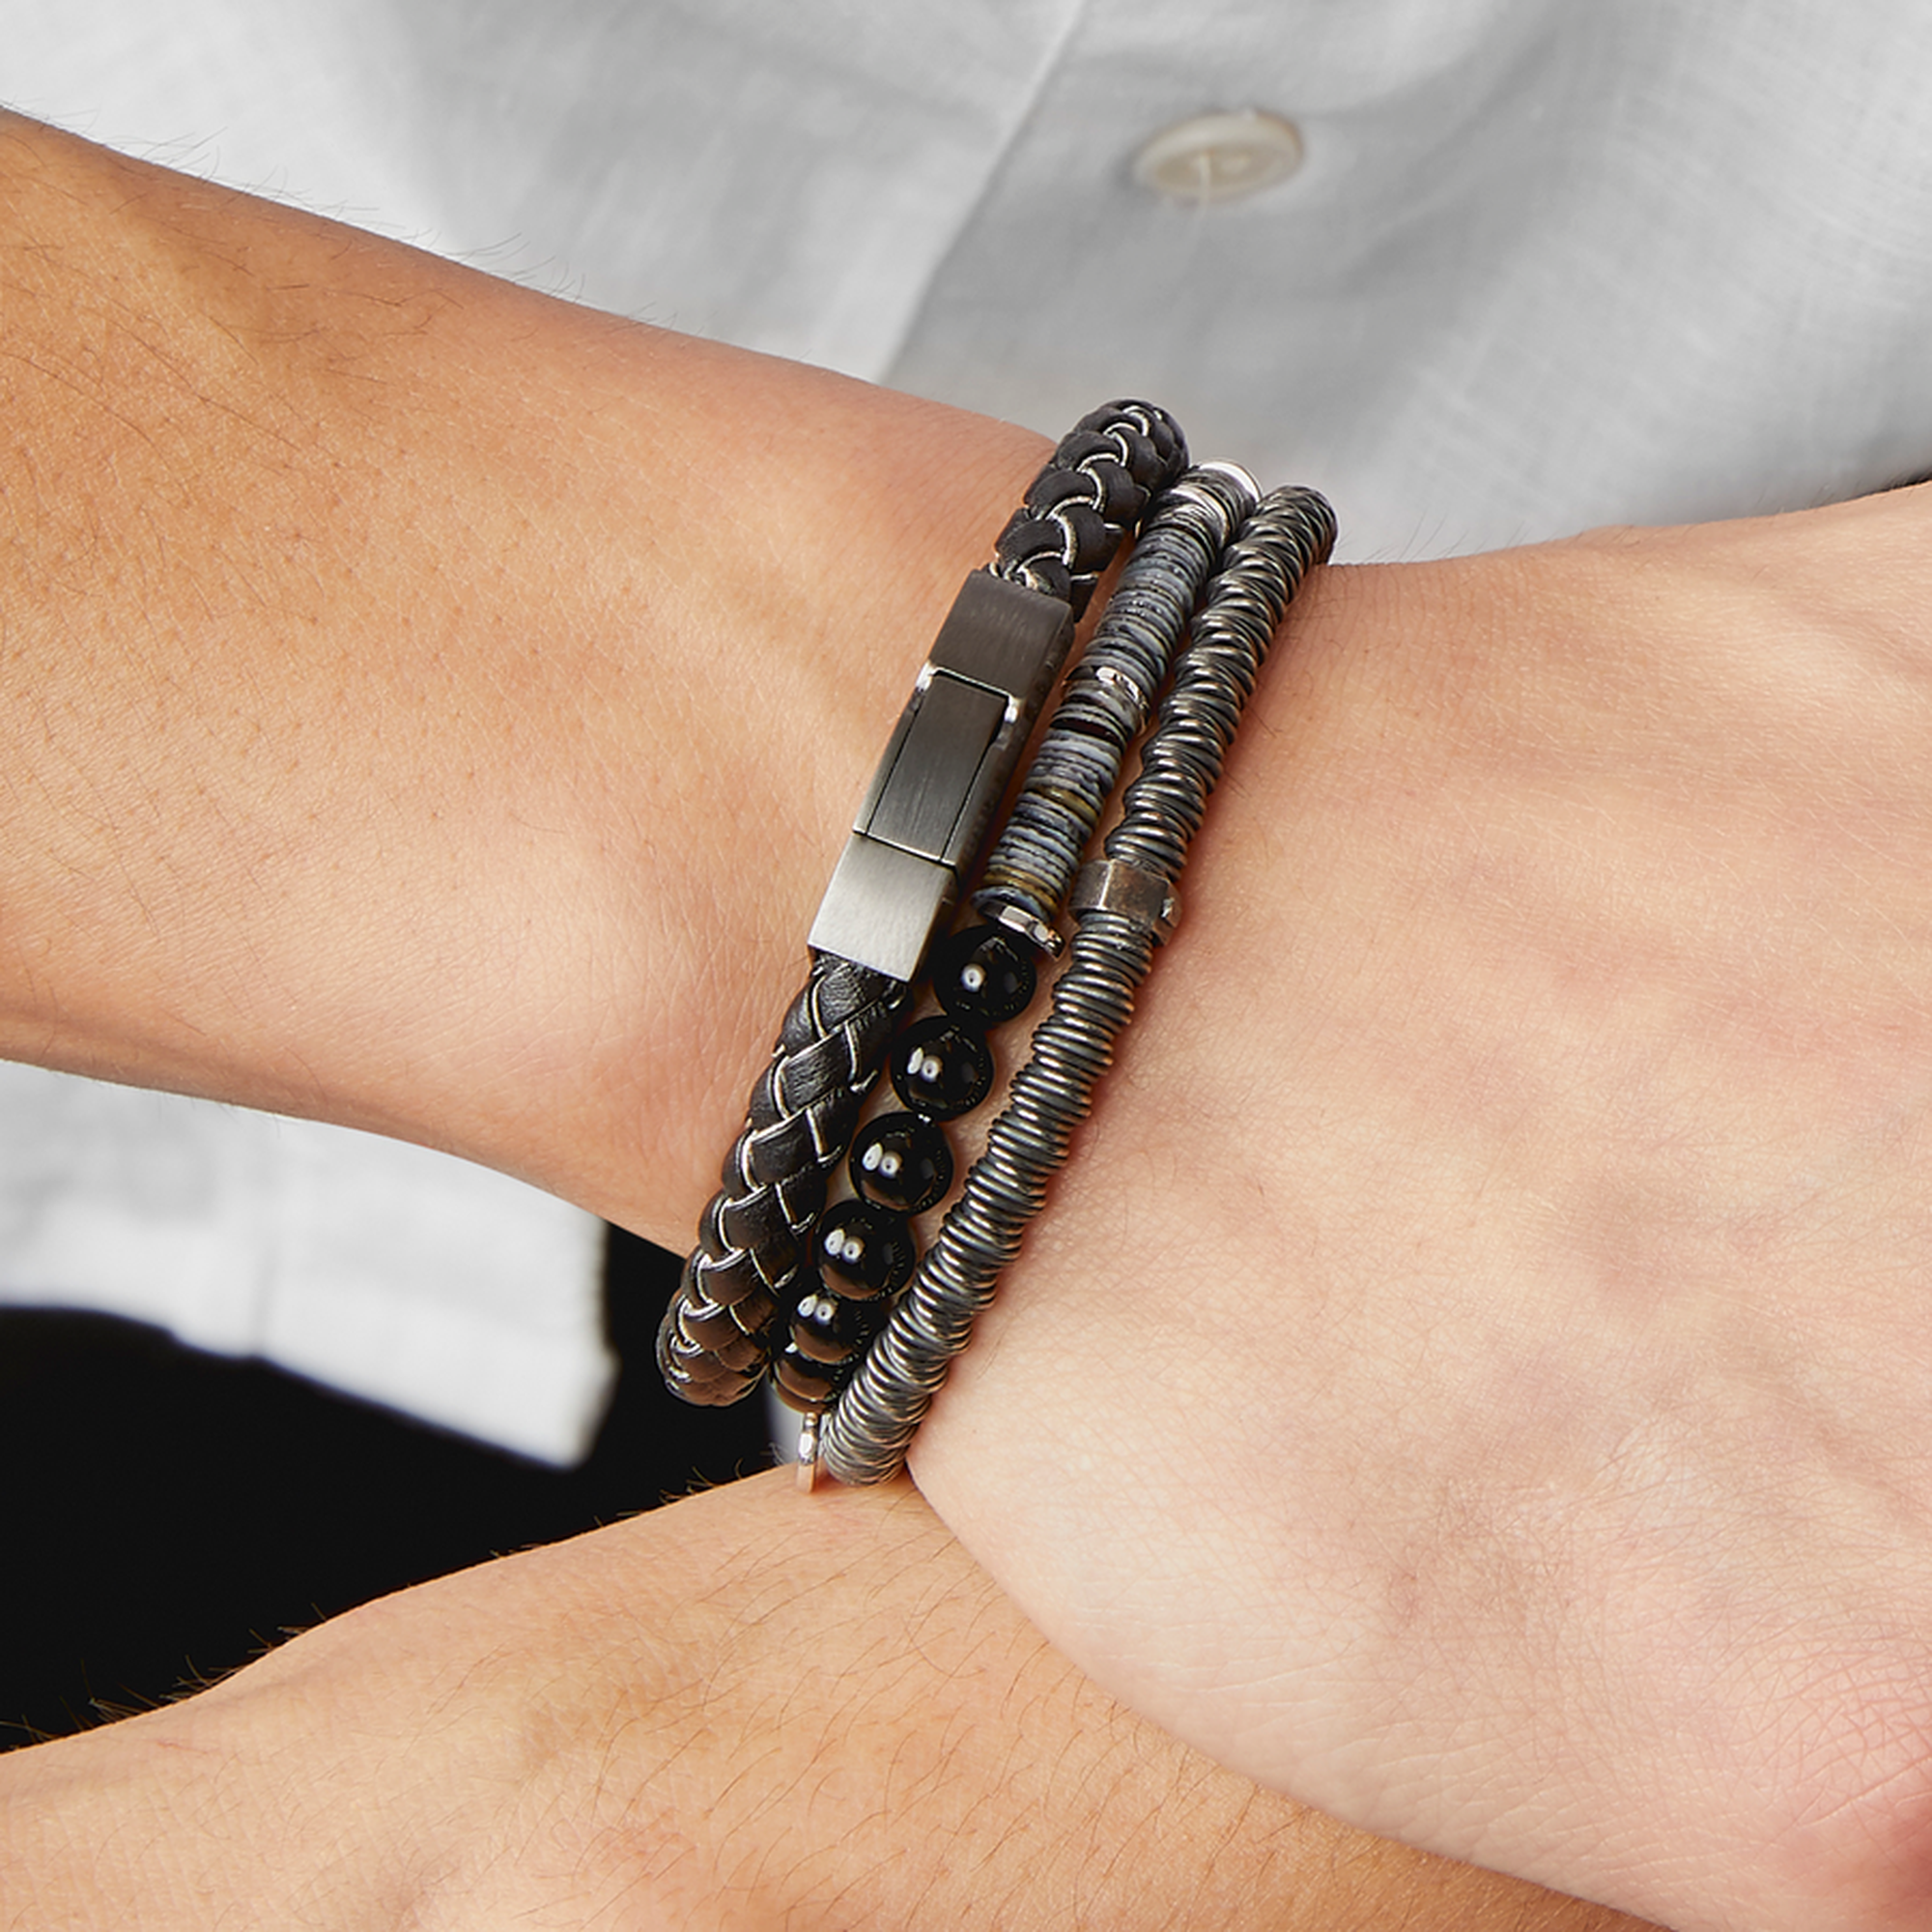 Click Tocco Bracelet in Grey Piped Italian Black Leather with Black Rhodium Plated Sterling Silver-Bracelets-Tateossian-Cufflinks.com.sg